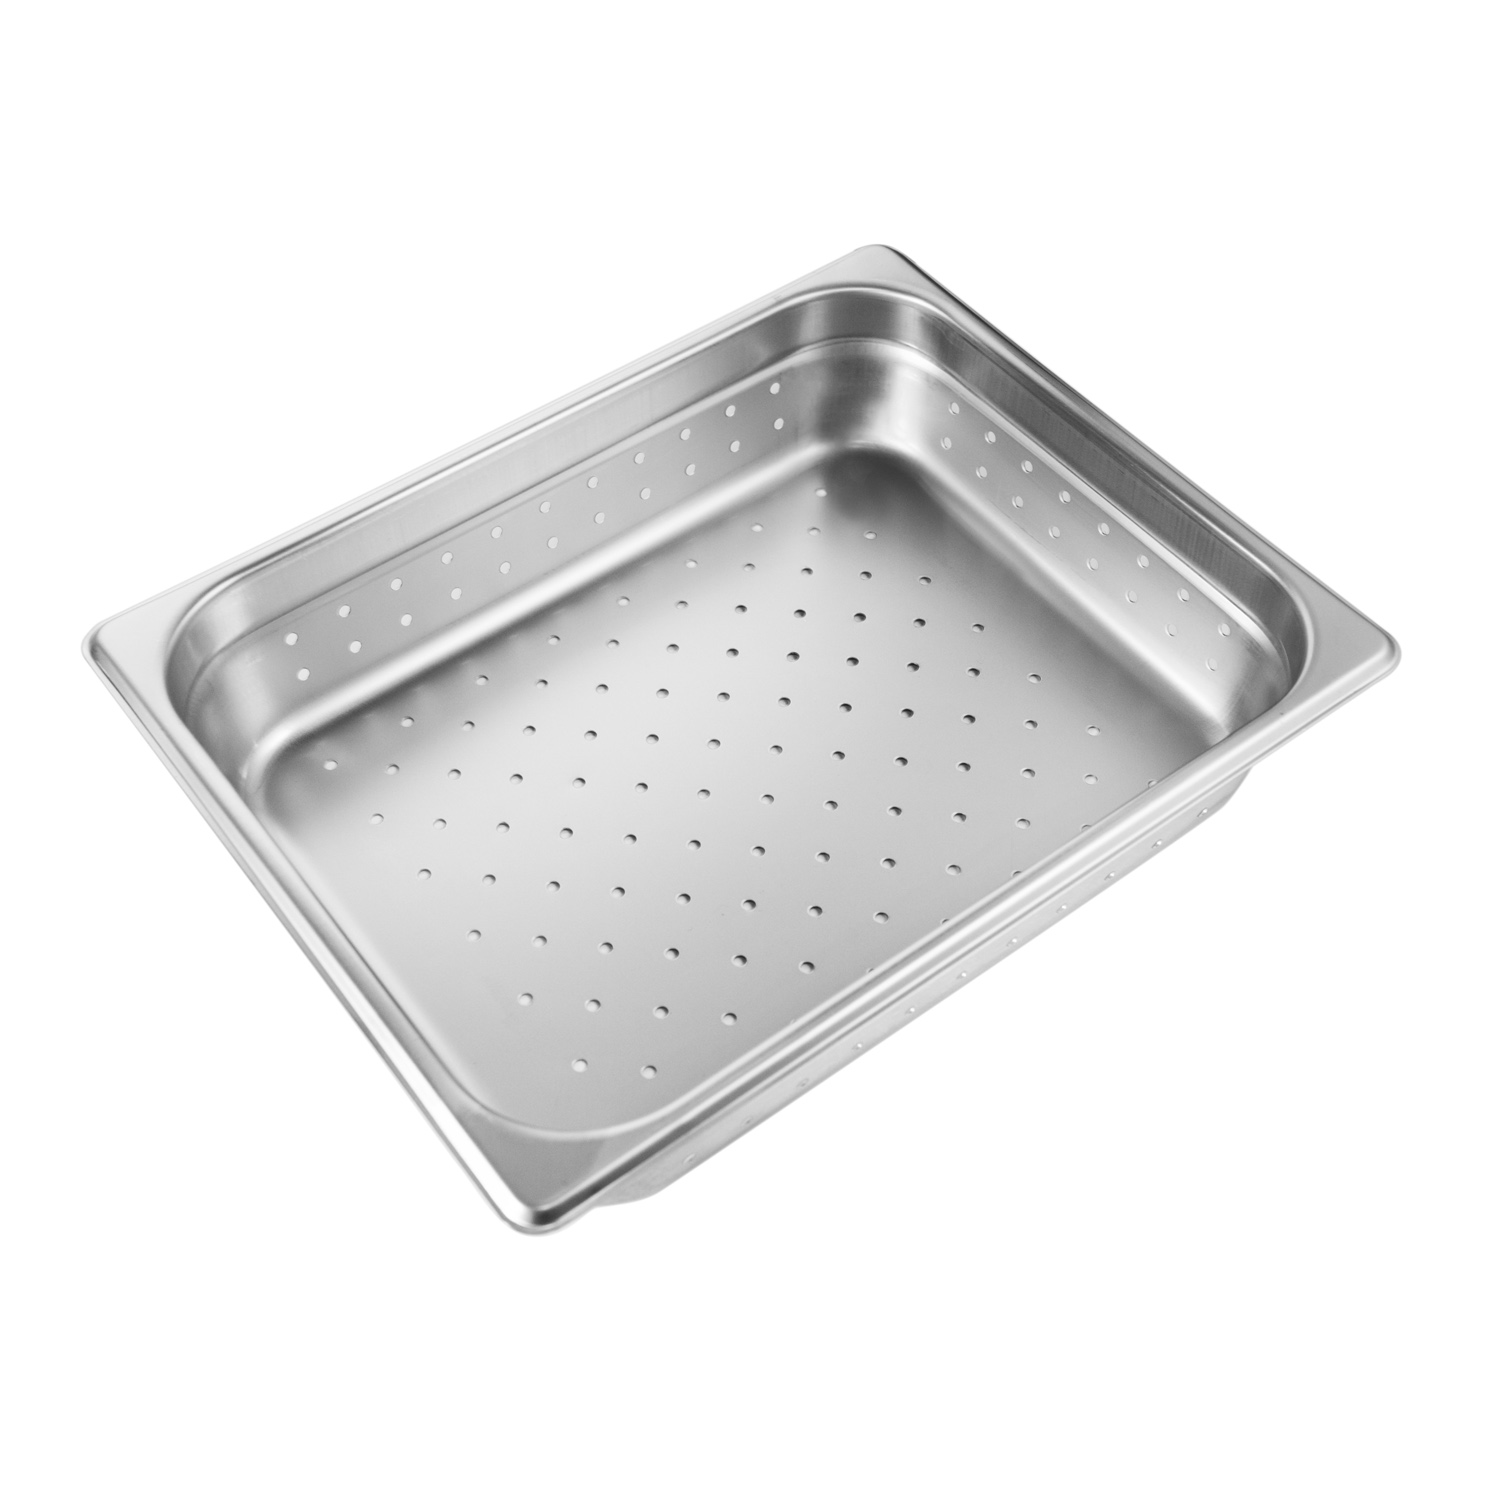 CAC China SSPH-24-2P Half Size 24-Gauge Perforated Stainless Steel Steam Pan 2 1/2"